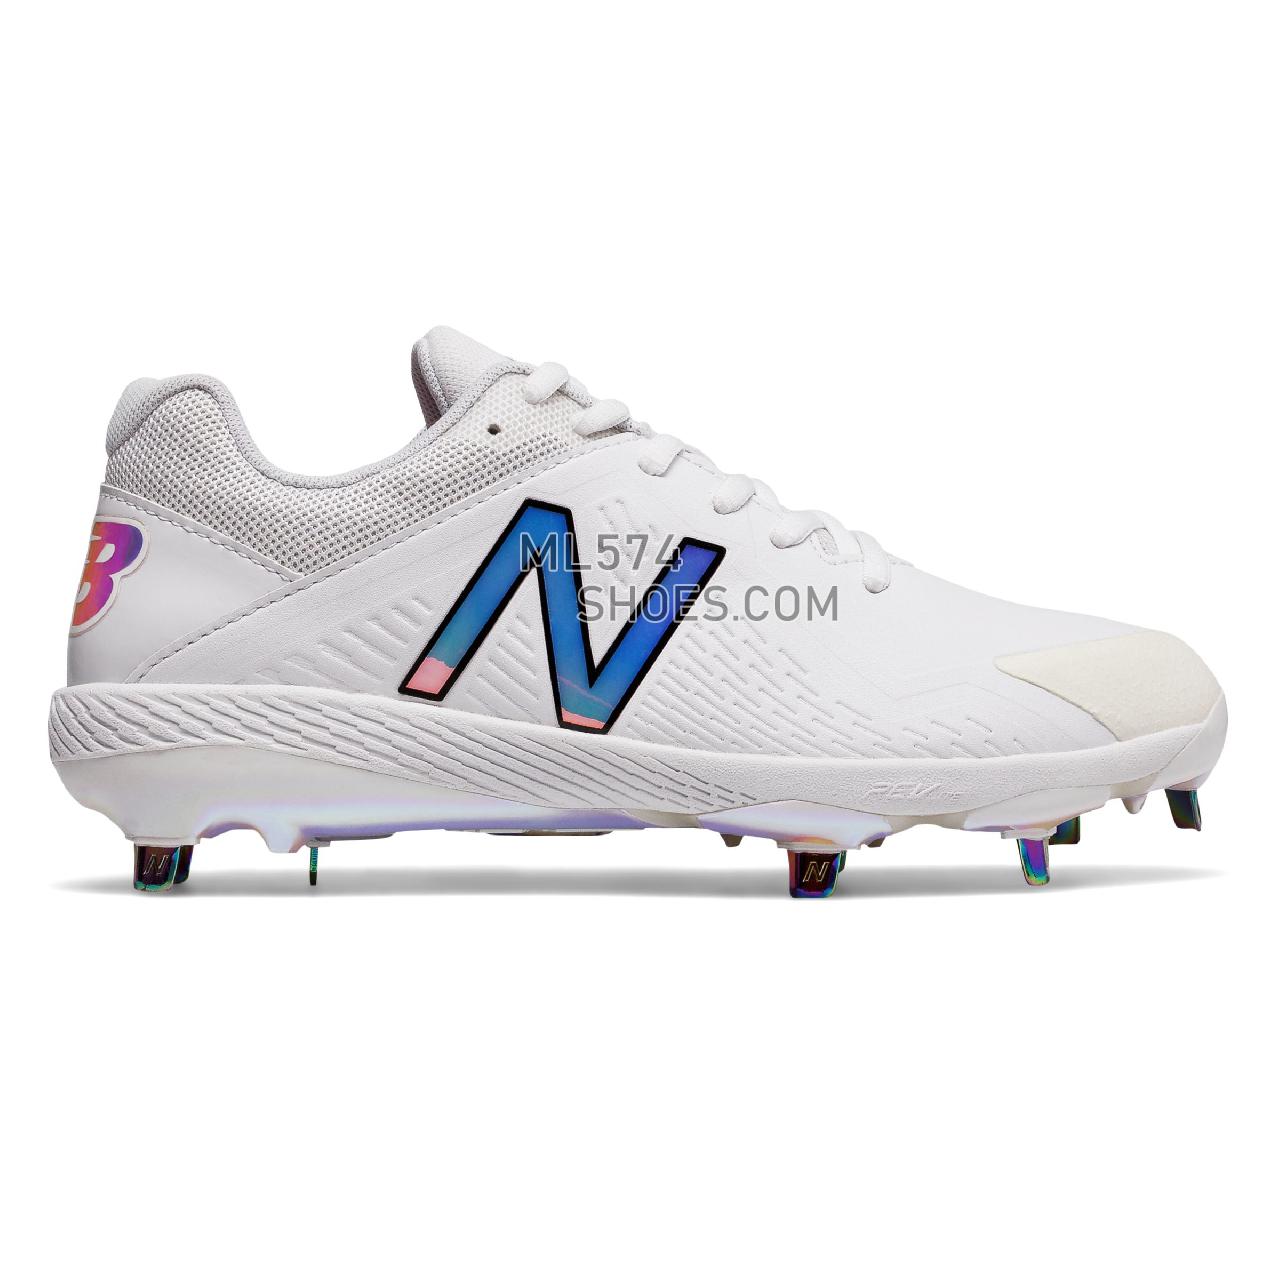 New Balance Low-Cut Fuse1 Metal Cleat - Women's 1 - Baseball White with Rose Gold - SMFUSEH1